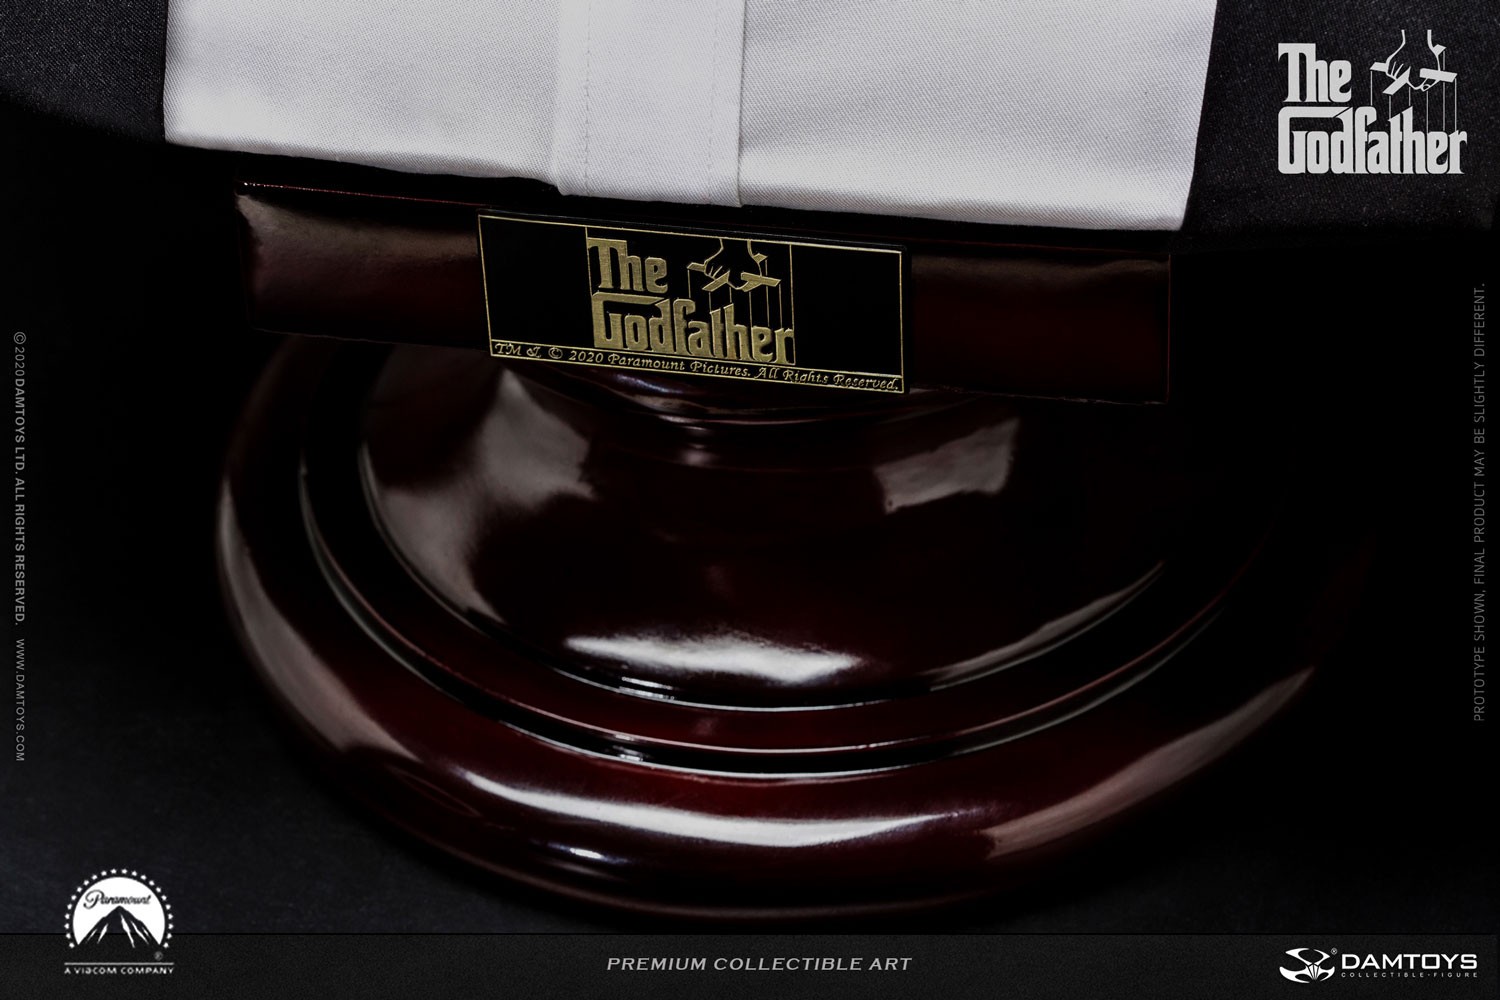 The Godfather (1972 Edition) (Prototype Shown) View 12